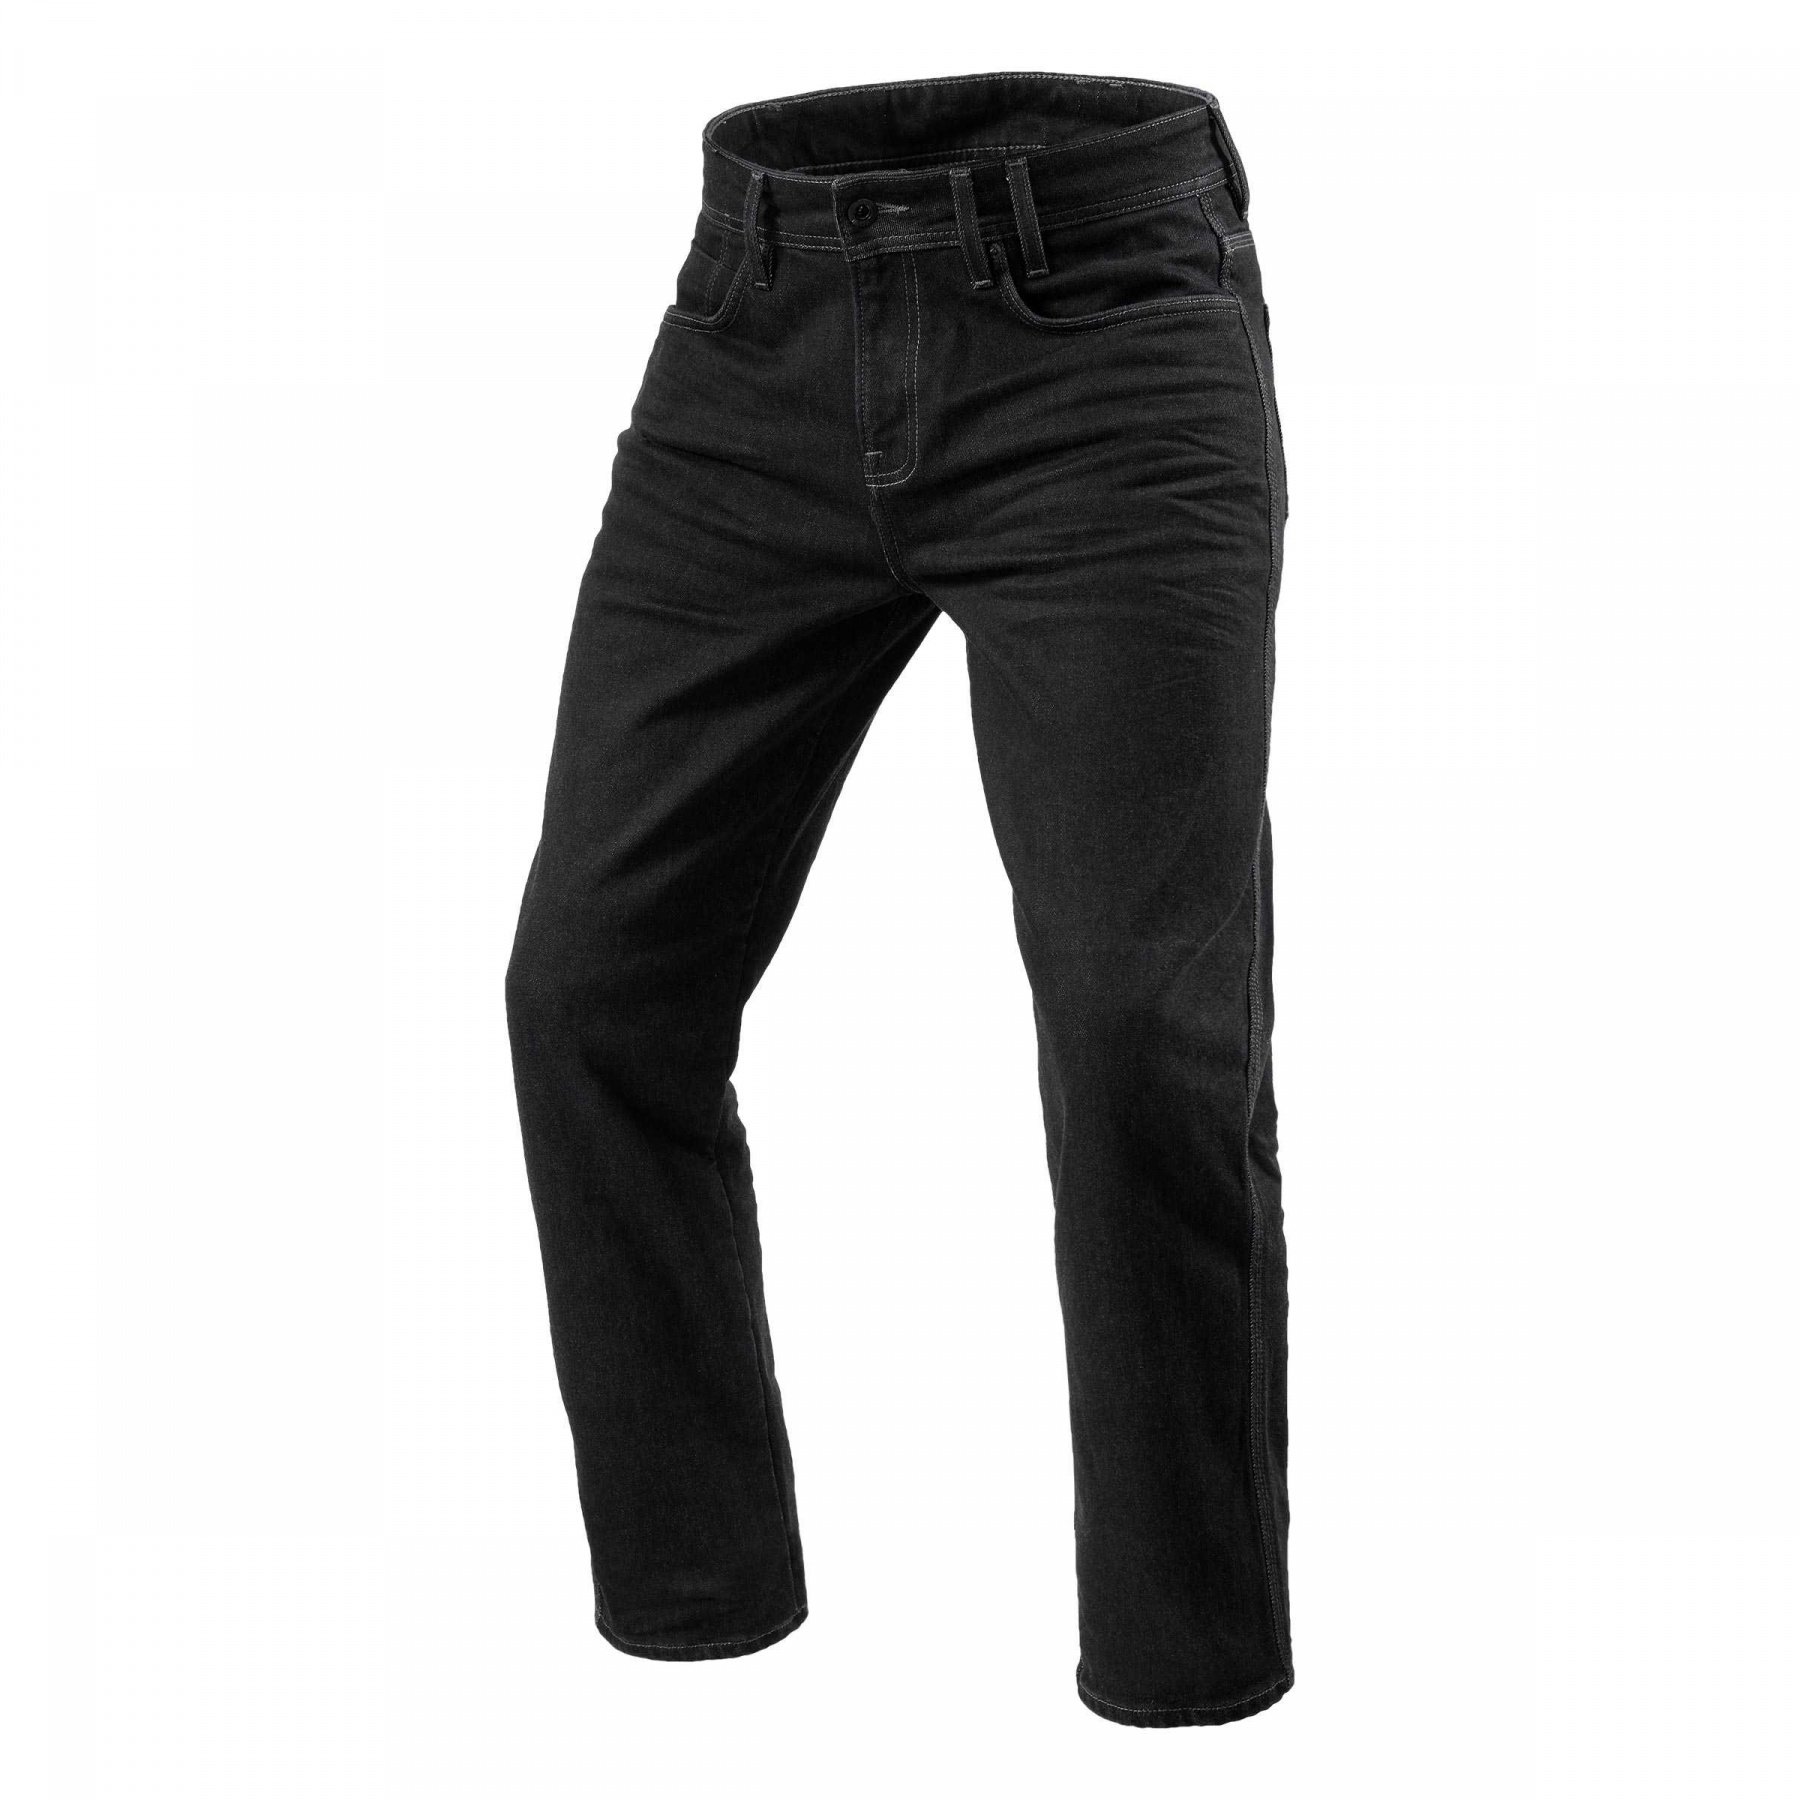 Image of REV'IT! Jeans Lombard 3 RF Dark Blue Used Motorcycle Jeans Size L32/W31 ID 8700001338332